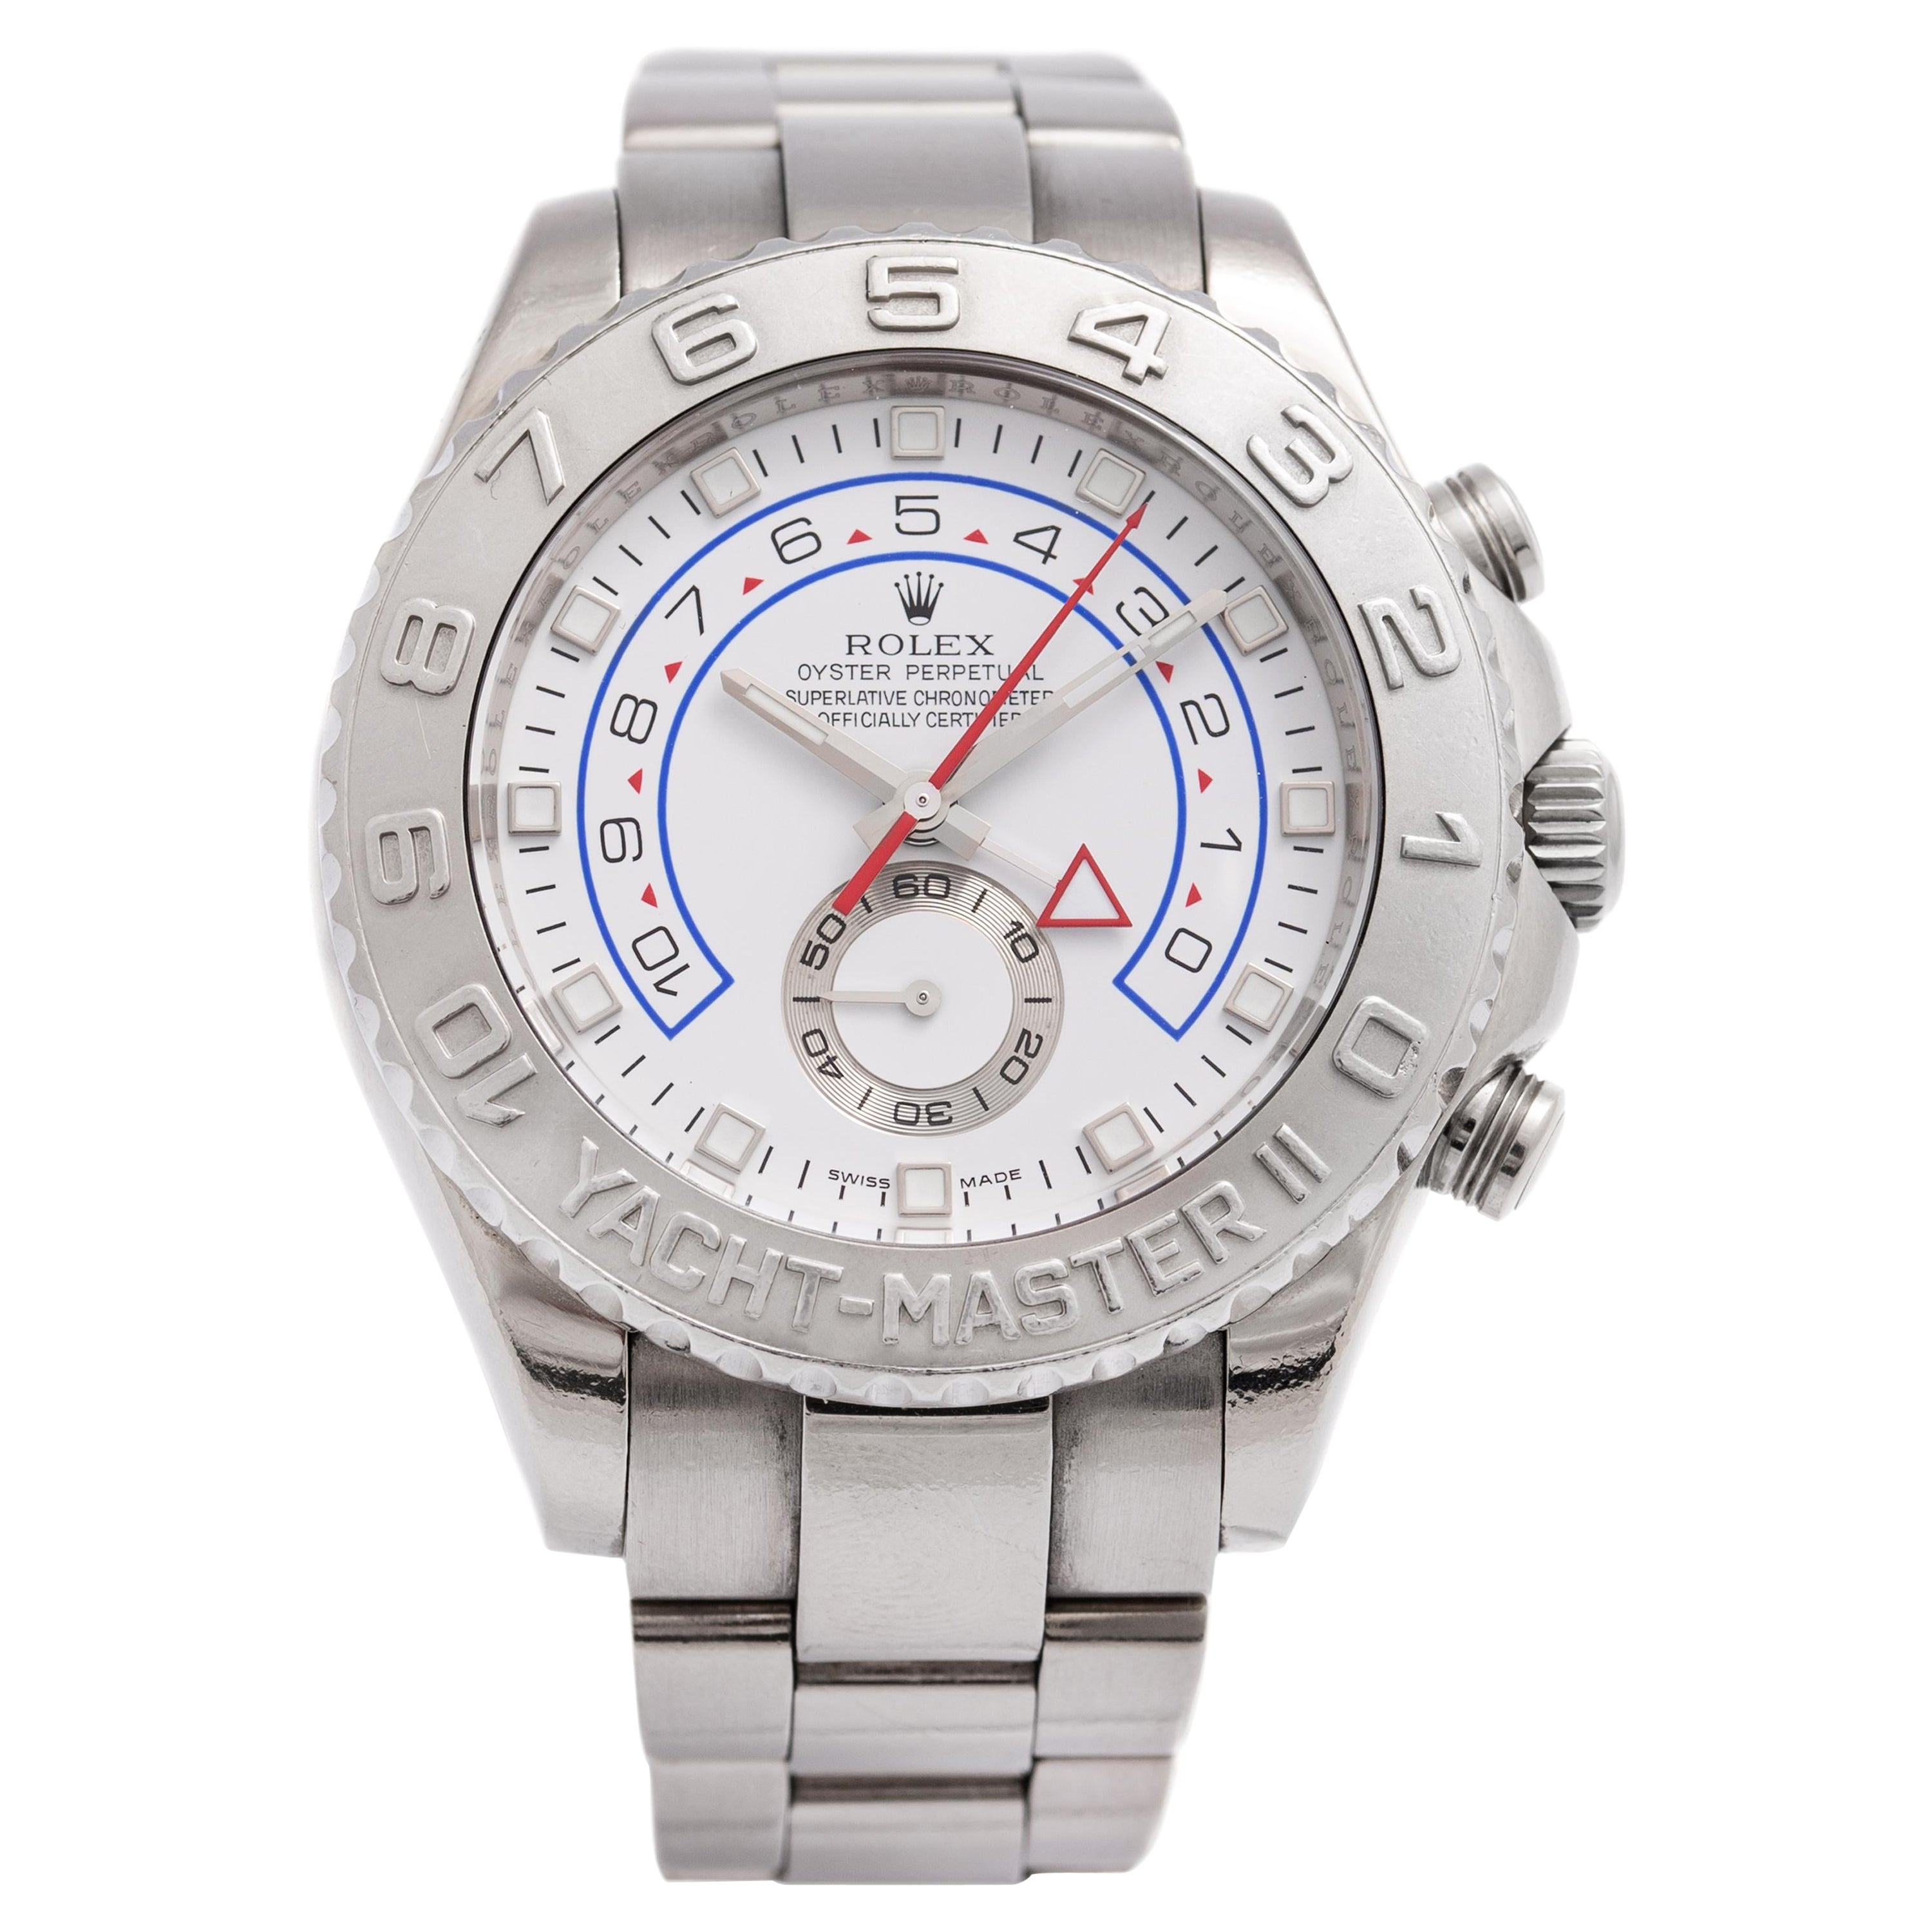 Rolex Yacht-Master II White Gold and Platinum White Dial 116689 For Sale